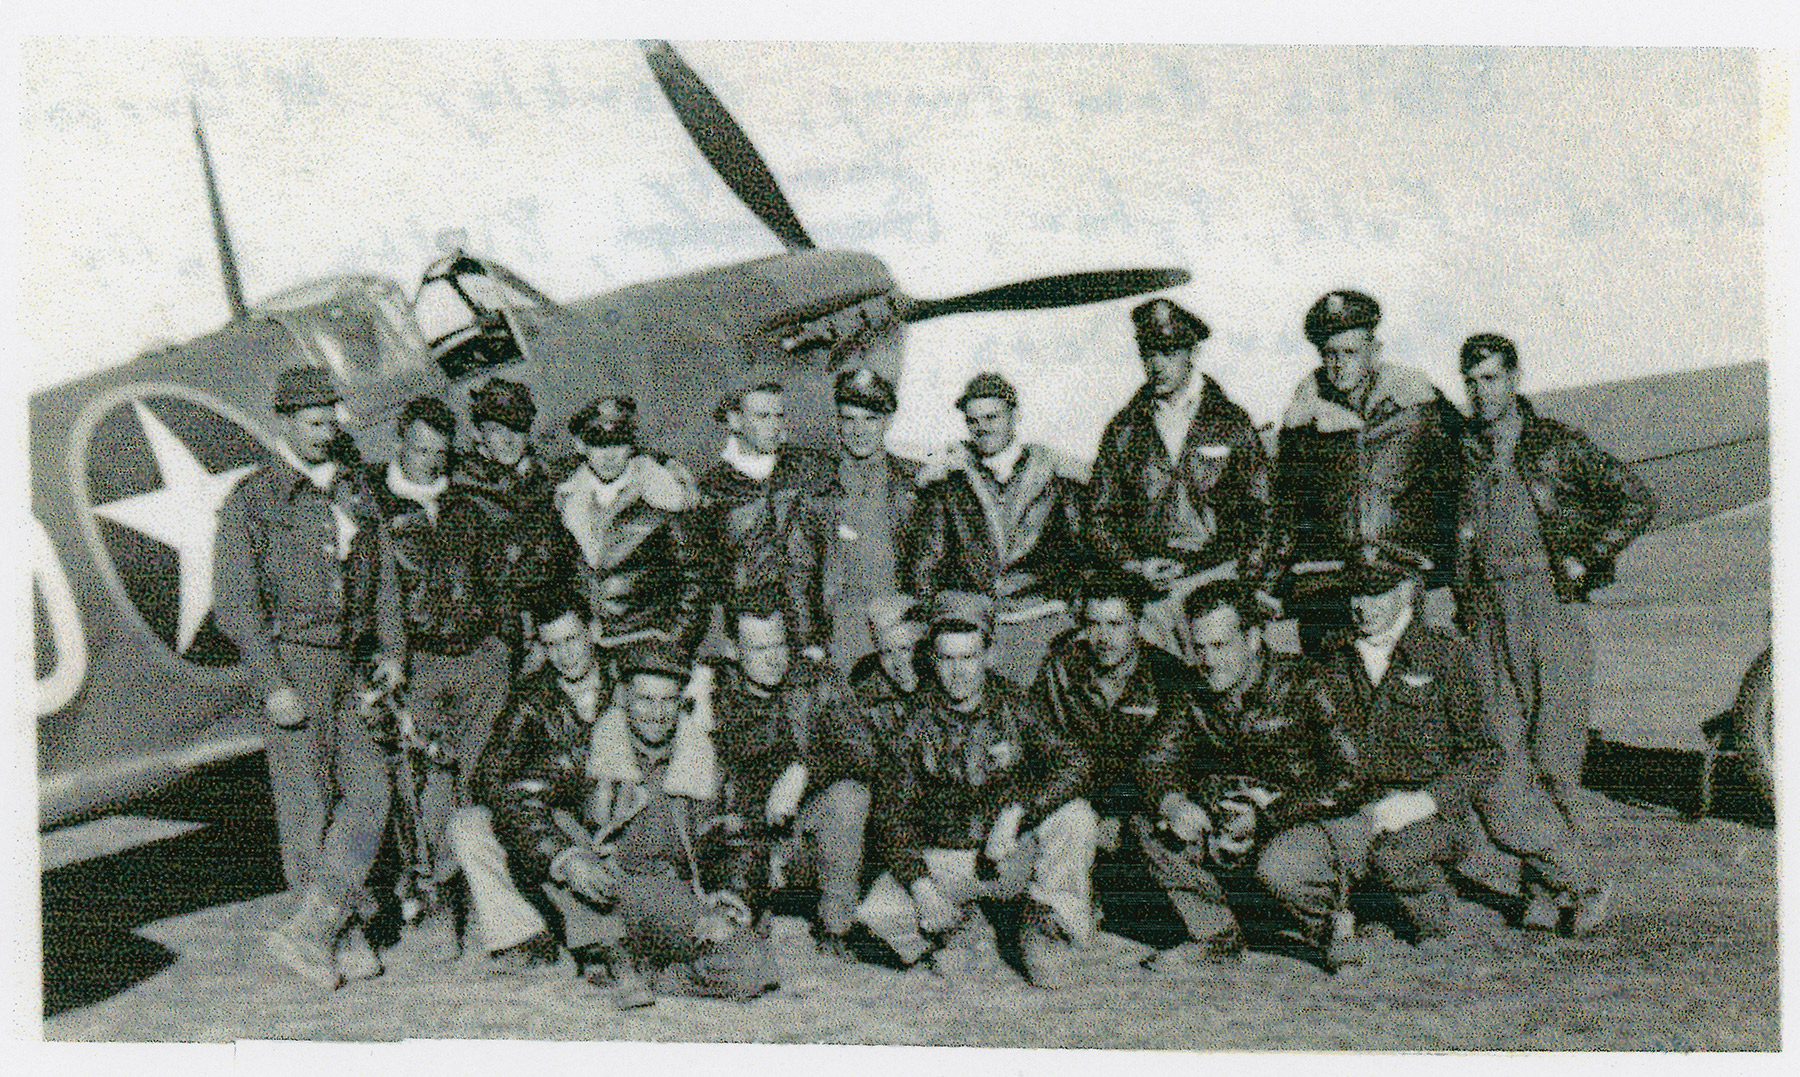 Jimmy Dougherty (Seated 3rd from left) with group of fellow Spitfire pilot of the 52d Fighter Squadron. Courtesy of the Dougherty Family.